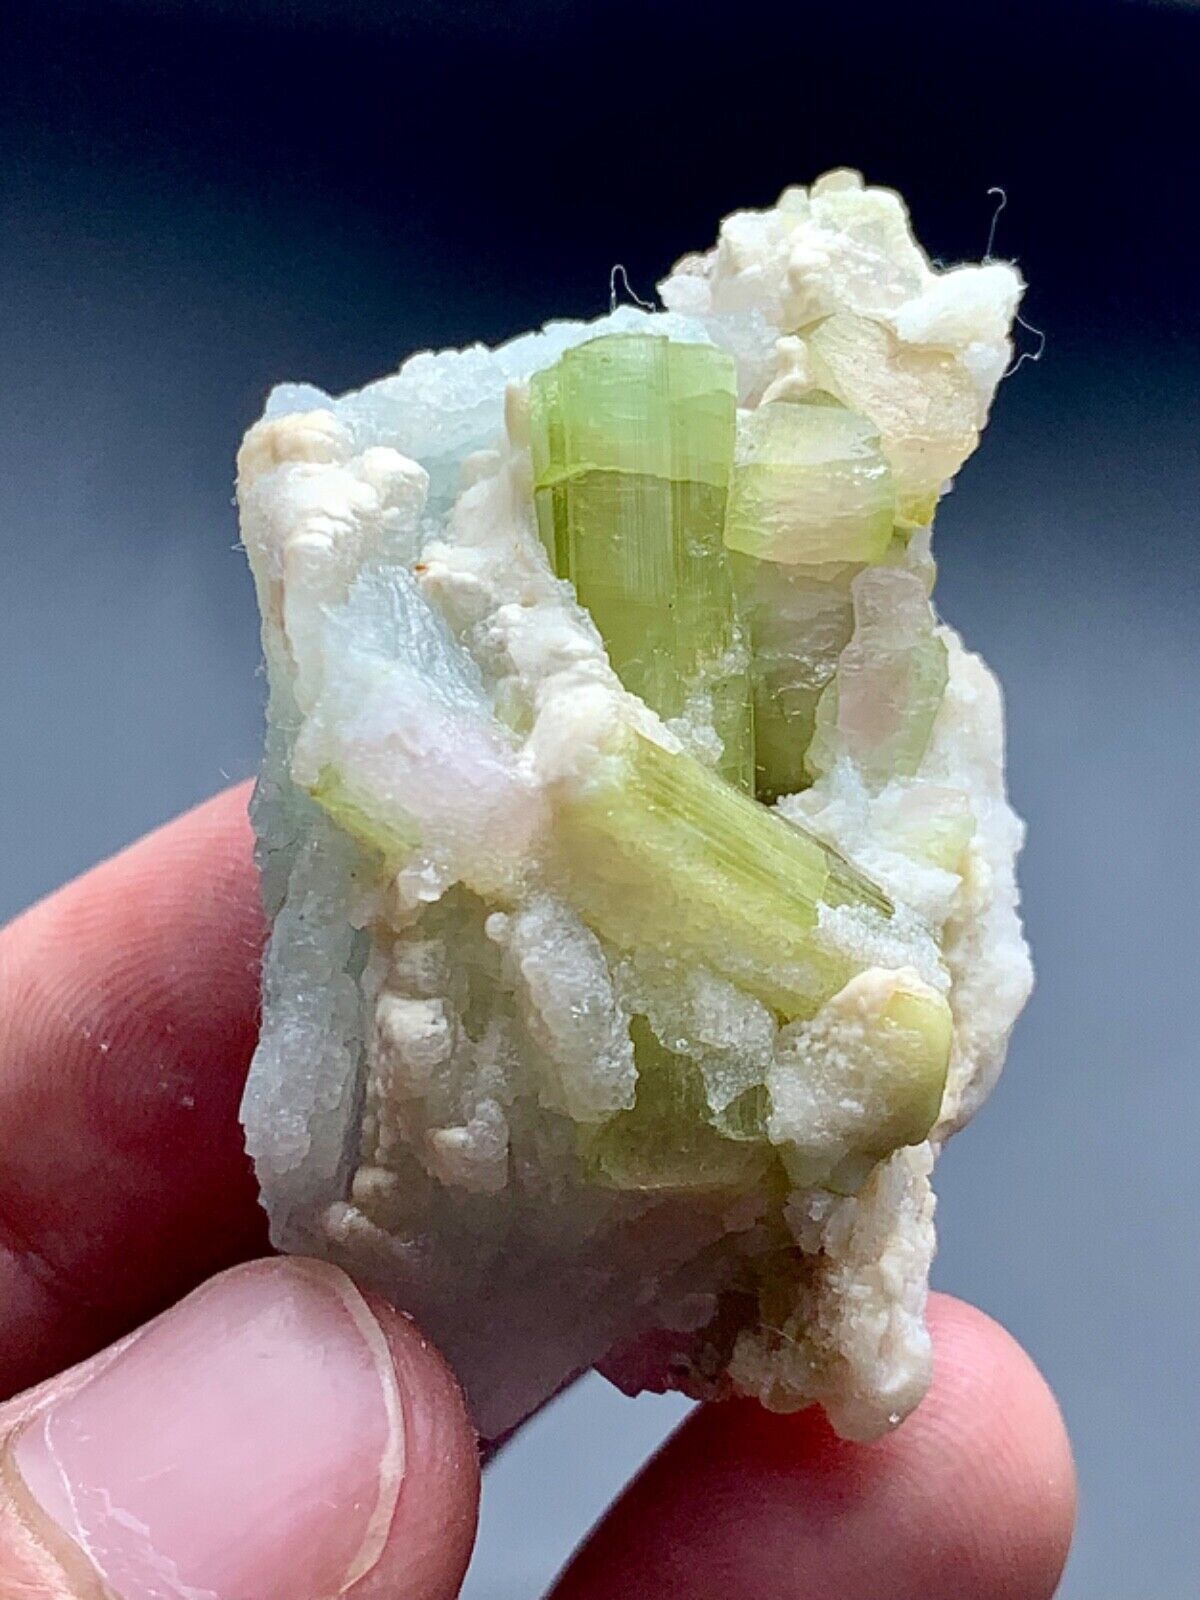 203CT Watermelon Tourmaline Crystals Bunch With Albite & Quartz From Afghanistan